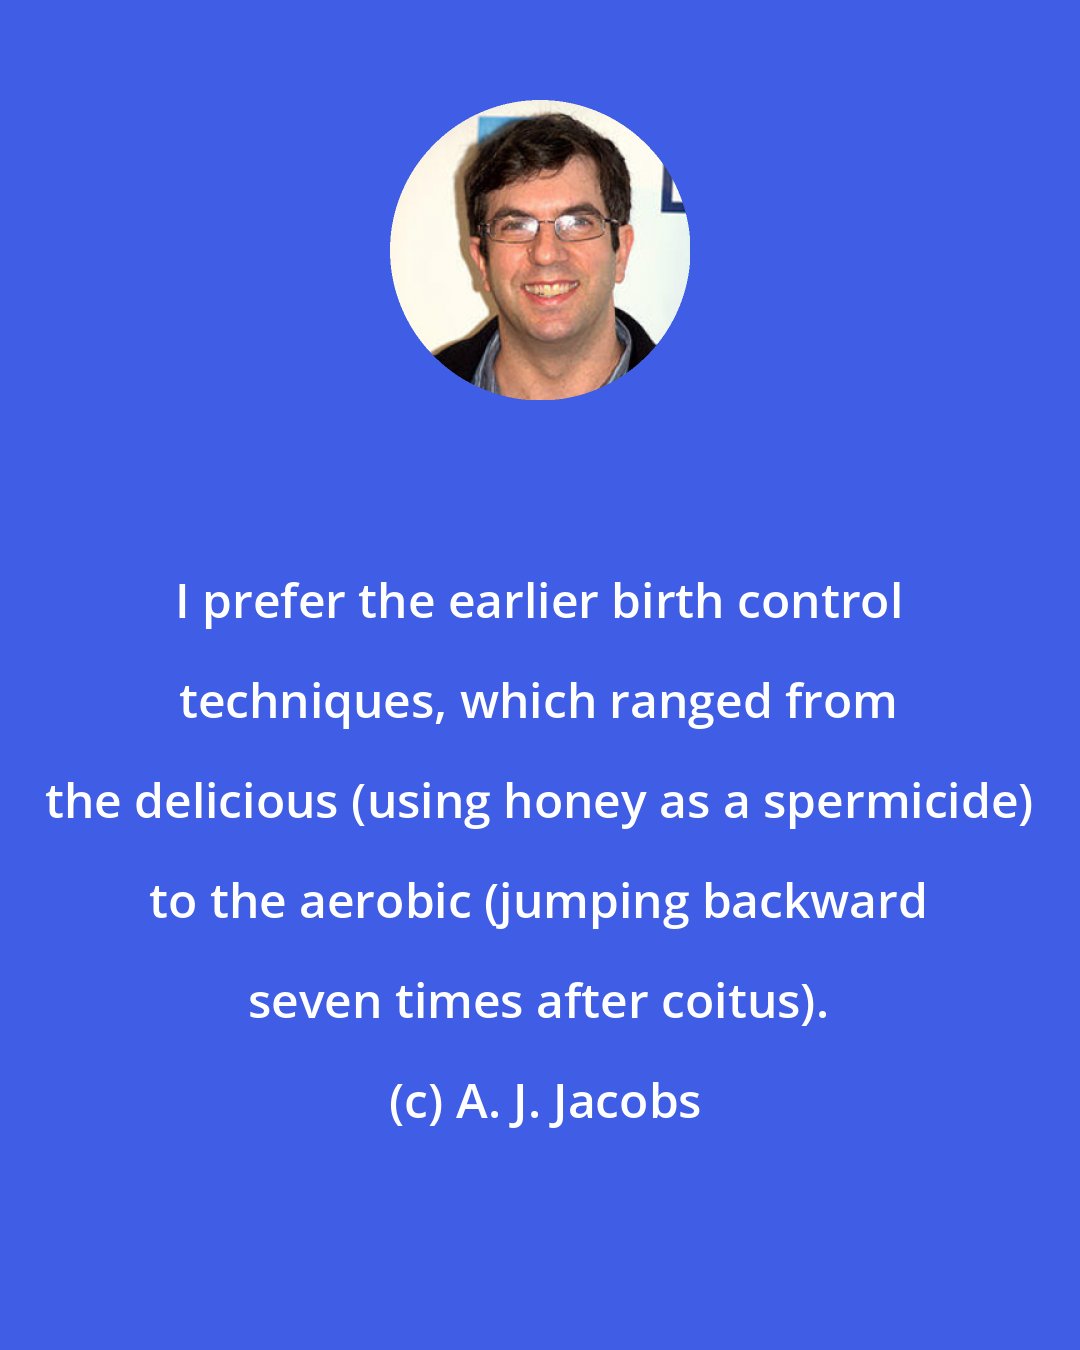 A. J. Jacobs: I prefer the earlier birth control techniques, which ranged from the delicious (using honey as a spermicide) to the aerobic (jumping backward seven times after coitus).